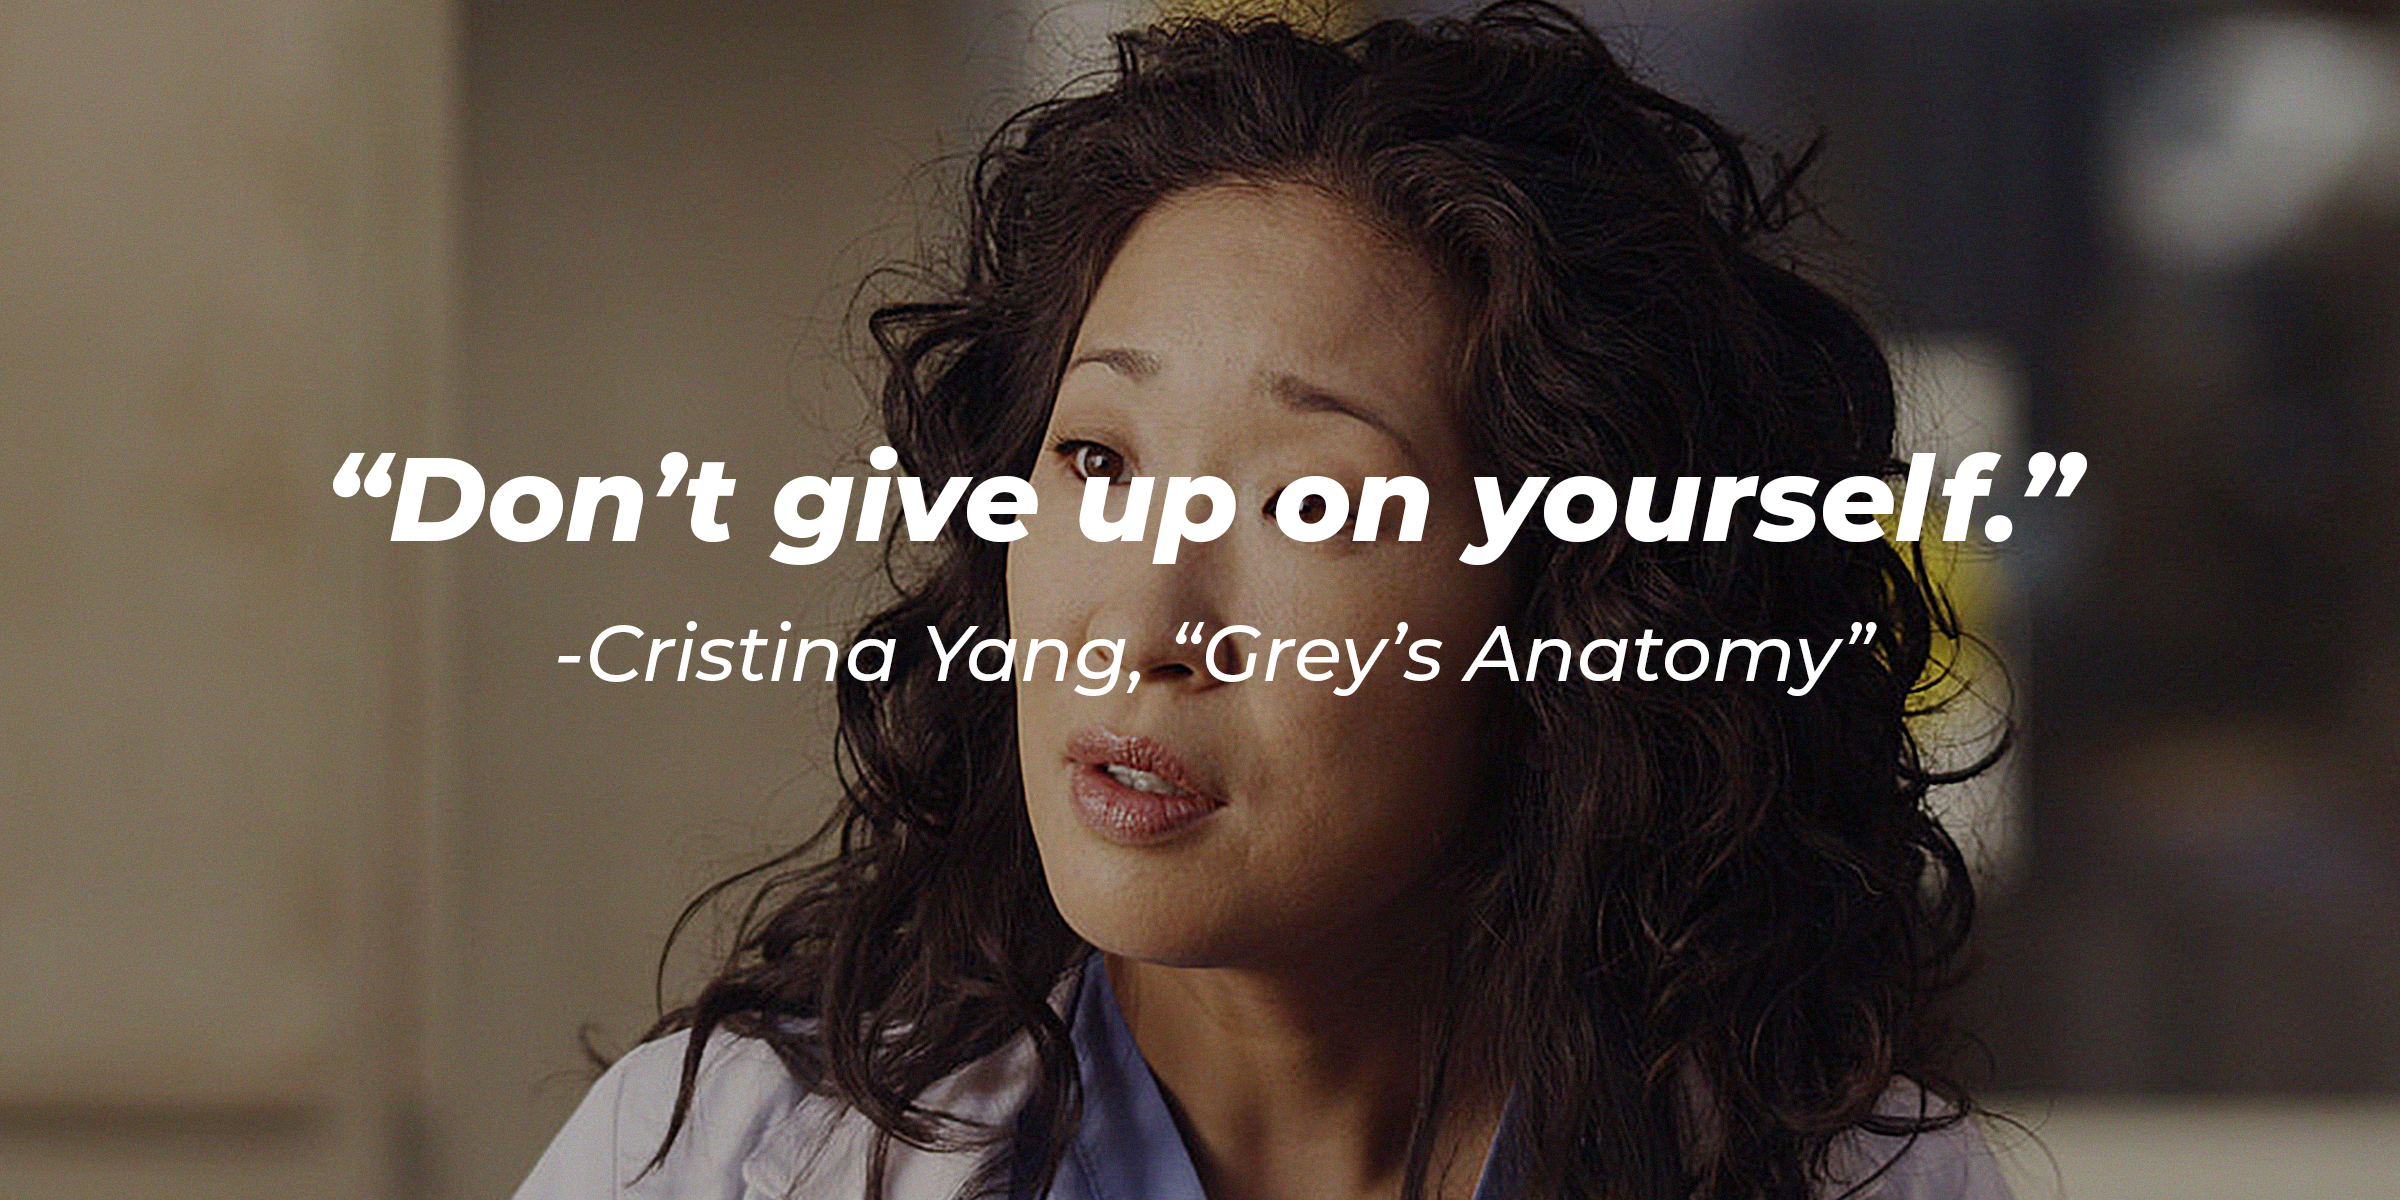 Cristina Yang with her quote on "Grey's Anatomy:" “Don’t give up on yourself.” | Source: Getty Images